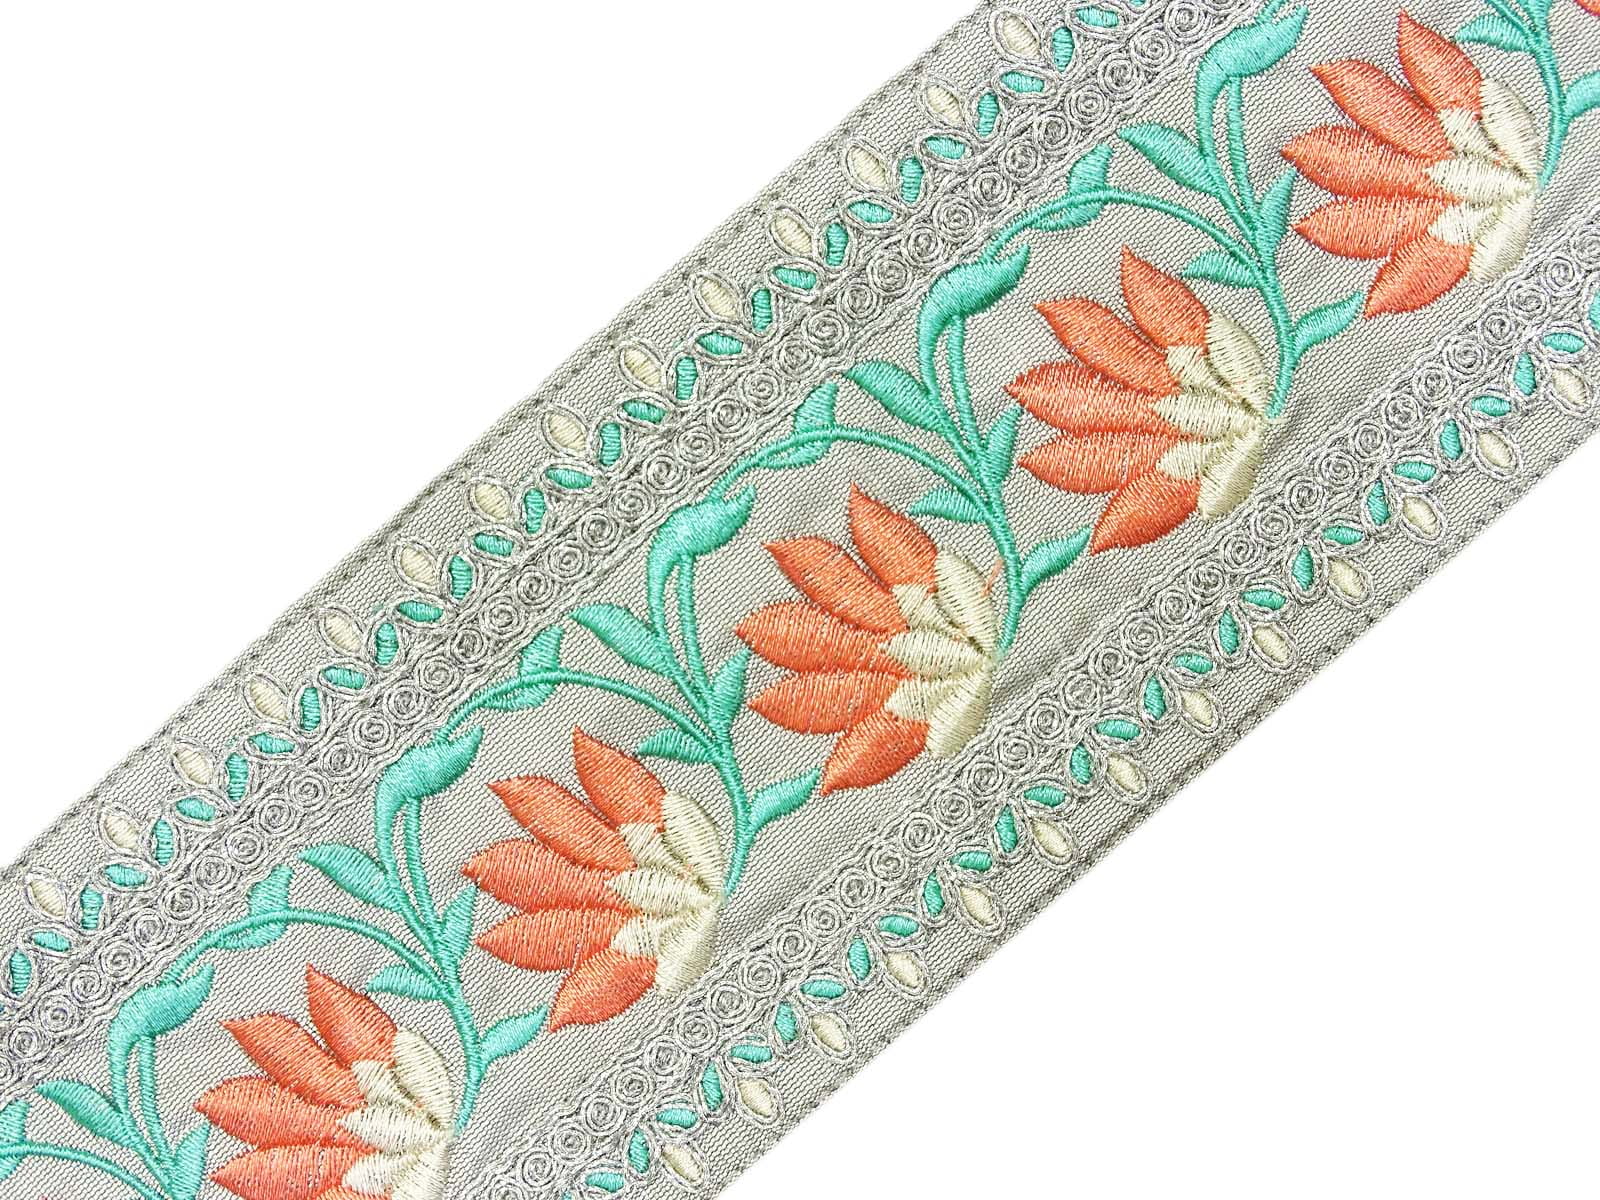 IBA Indianbeautifulart Beige Floral Laces for Crafts Dupion Trim Craft Supplies Border Lace by 3 Yard-3 Inch 